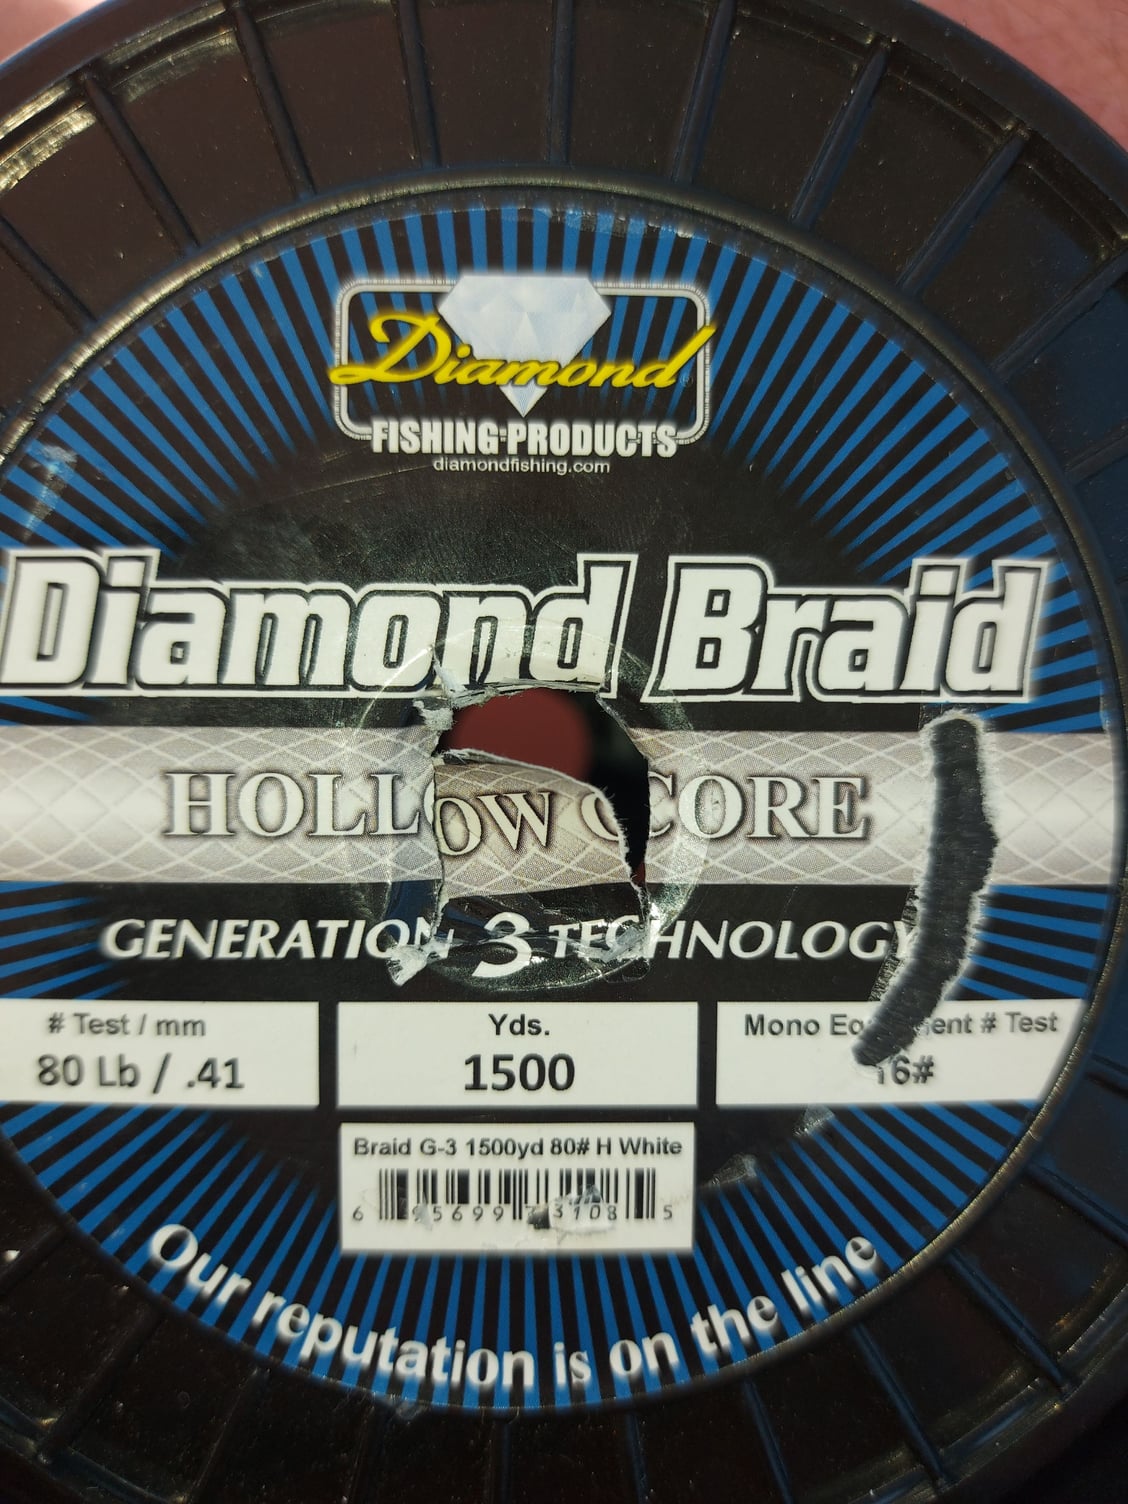 Diamond Braid Quality - The Hull Truth - Boating and Fishing Forum